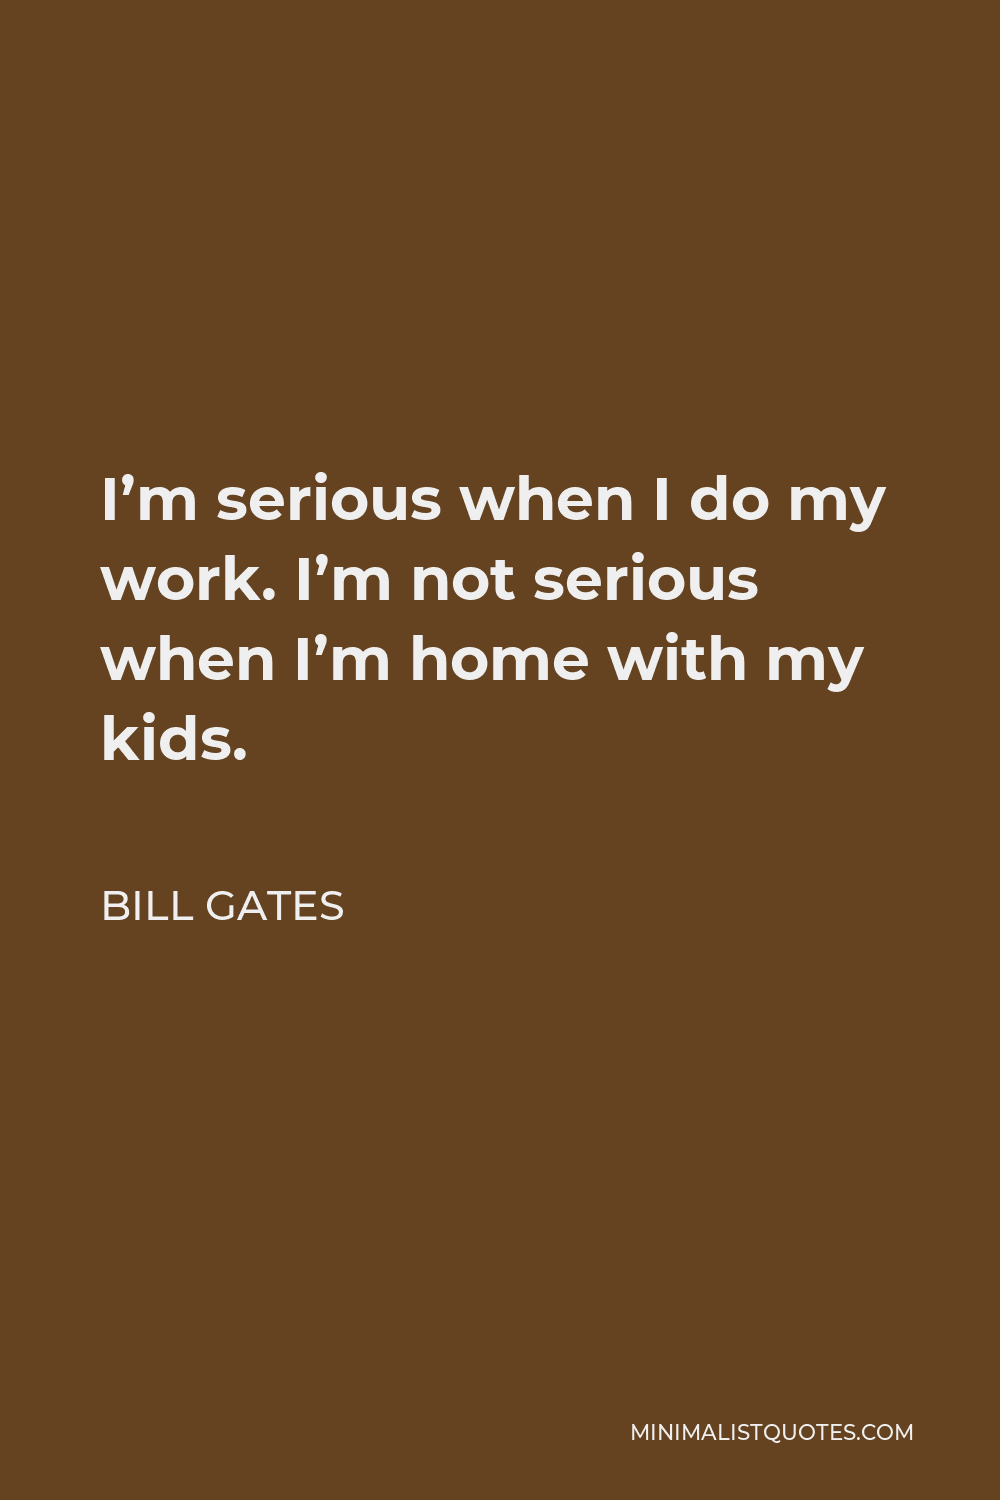 Bill Gates Quote - I’m serious when I do my work. I’m not serious when I’m home with my kids.